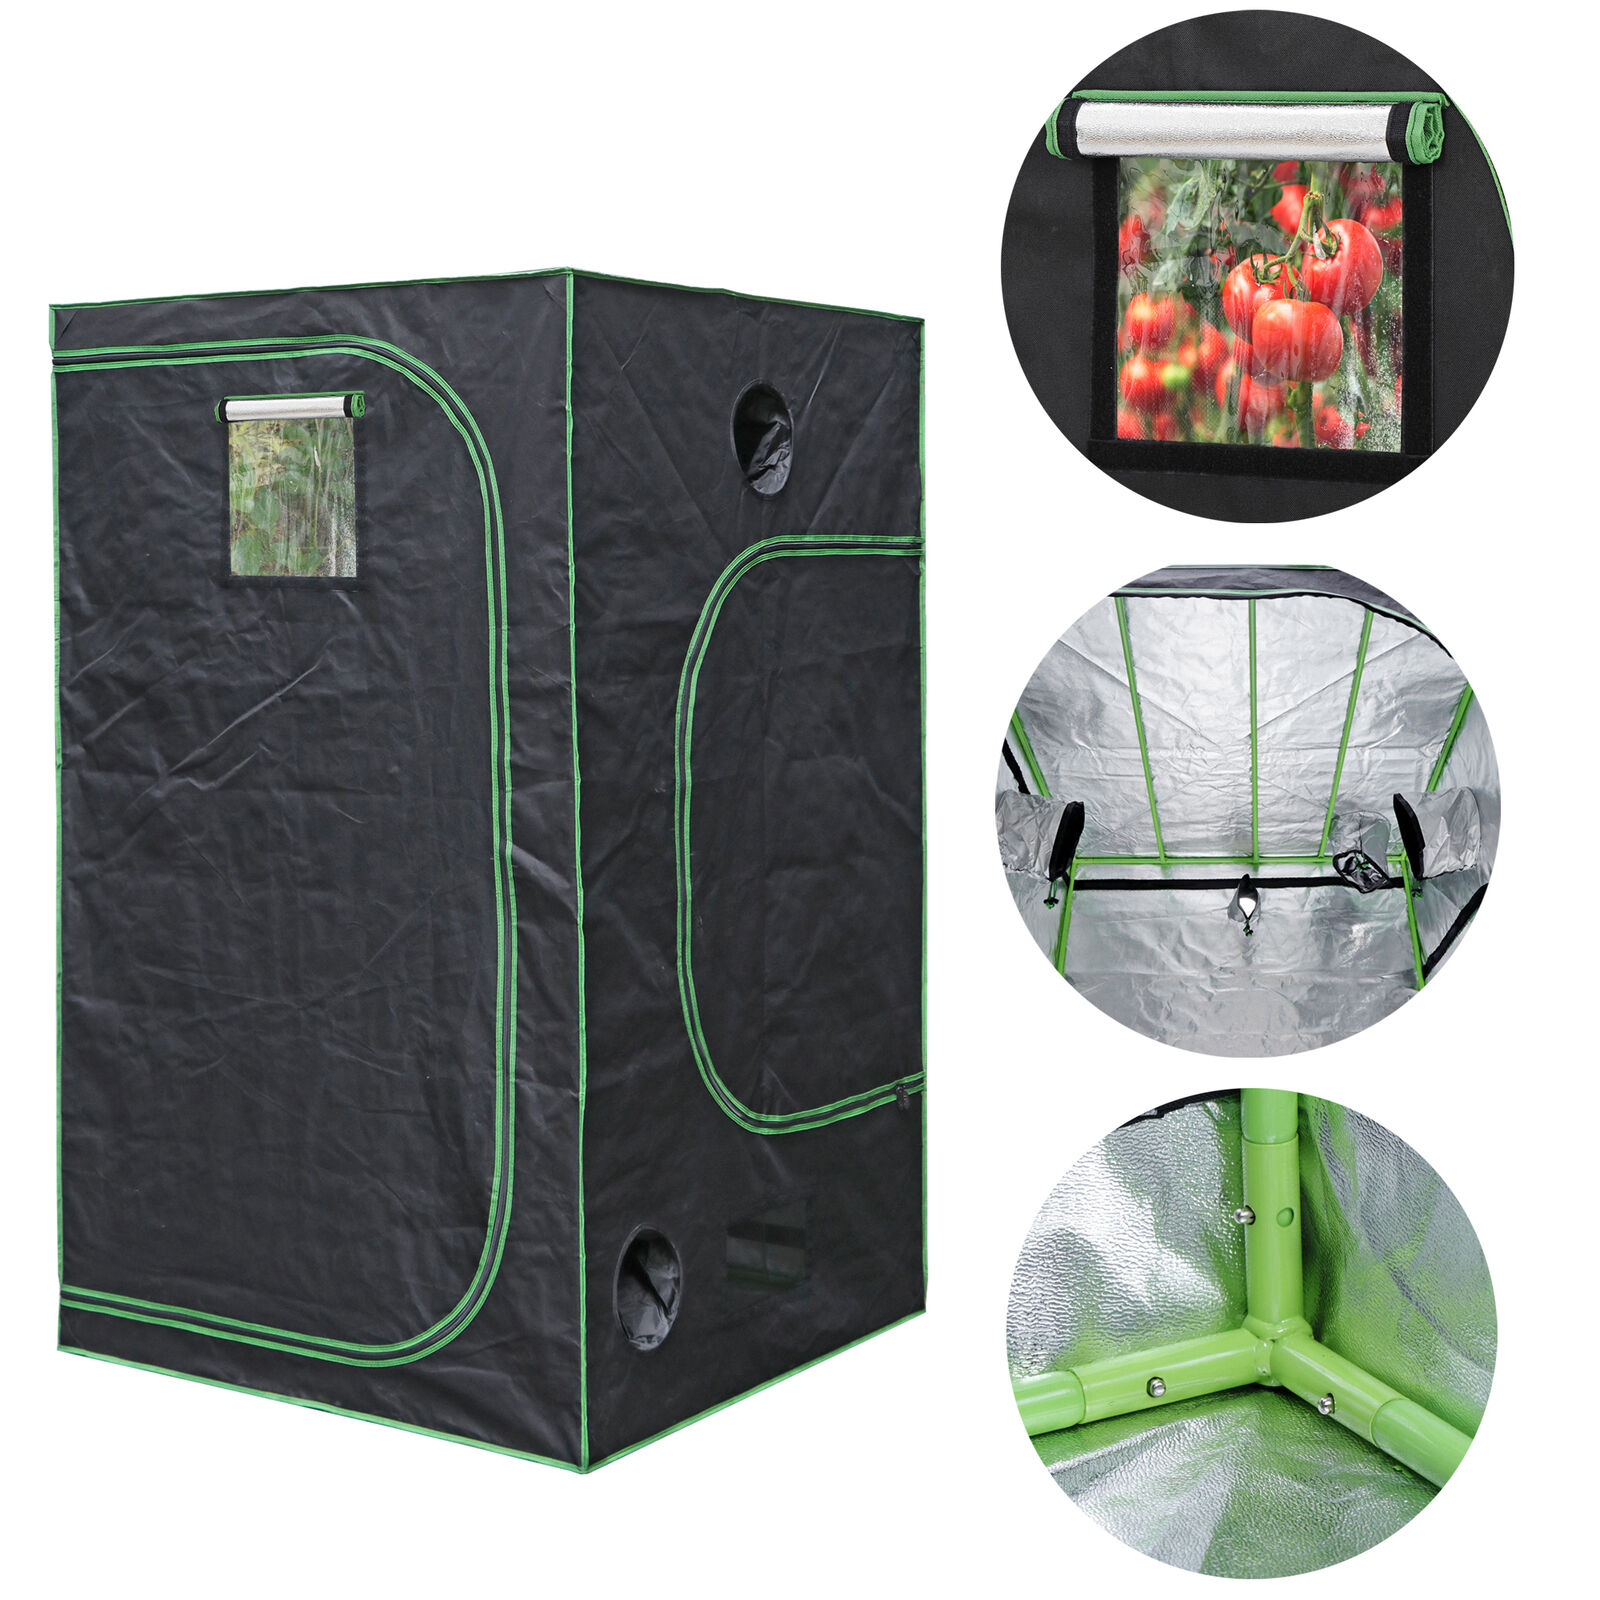 Seed Box Grow Tent  Hydroponics with Window Indoor Horticulture for Indoor Plant